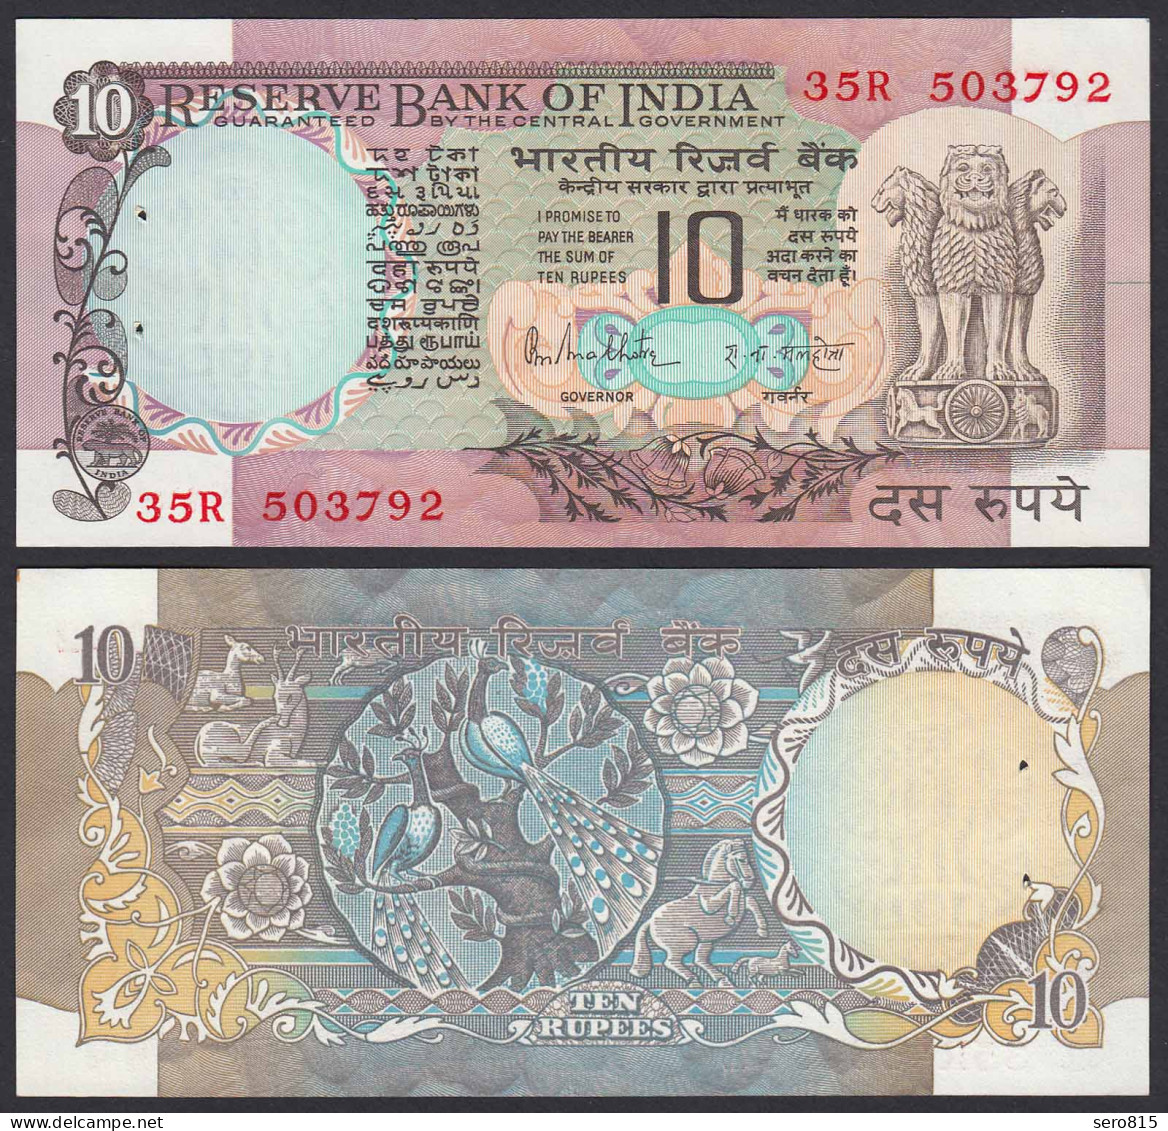 Indien - India - 10 RUPEES Banknote Pick 81h UNC (1) Letter C     (21858 - Other - Asia